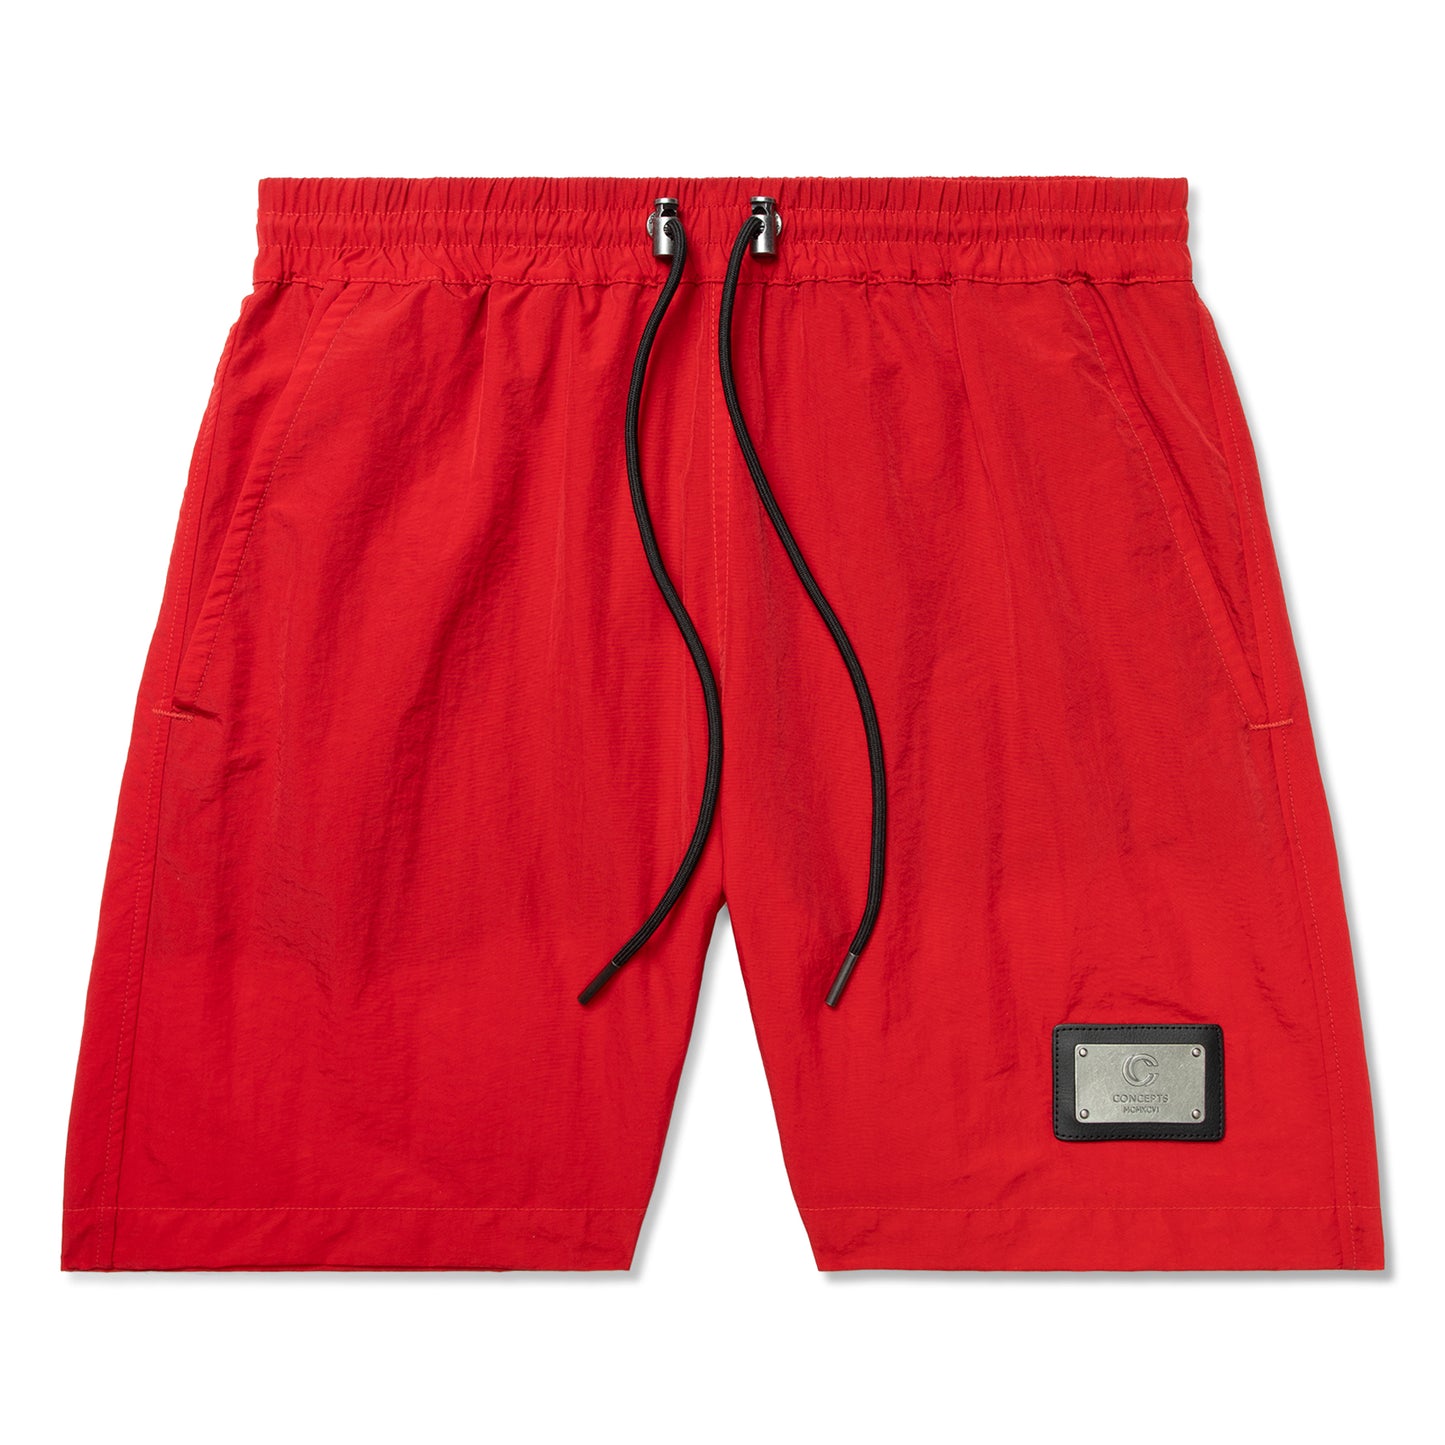 Concepts Home Plate Shorts (Red)